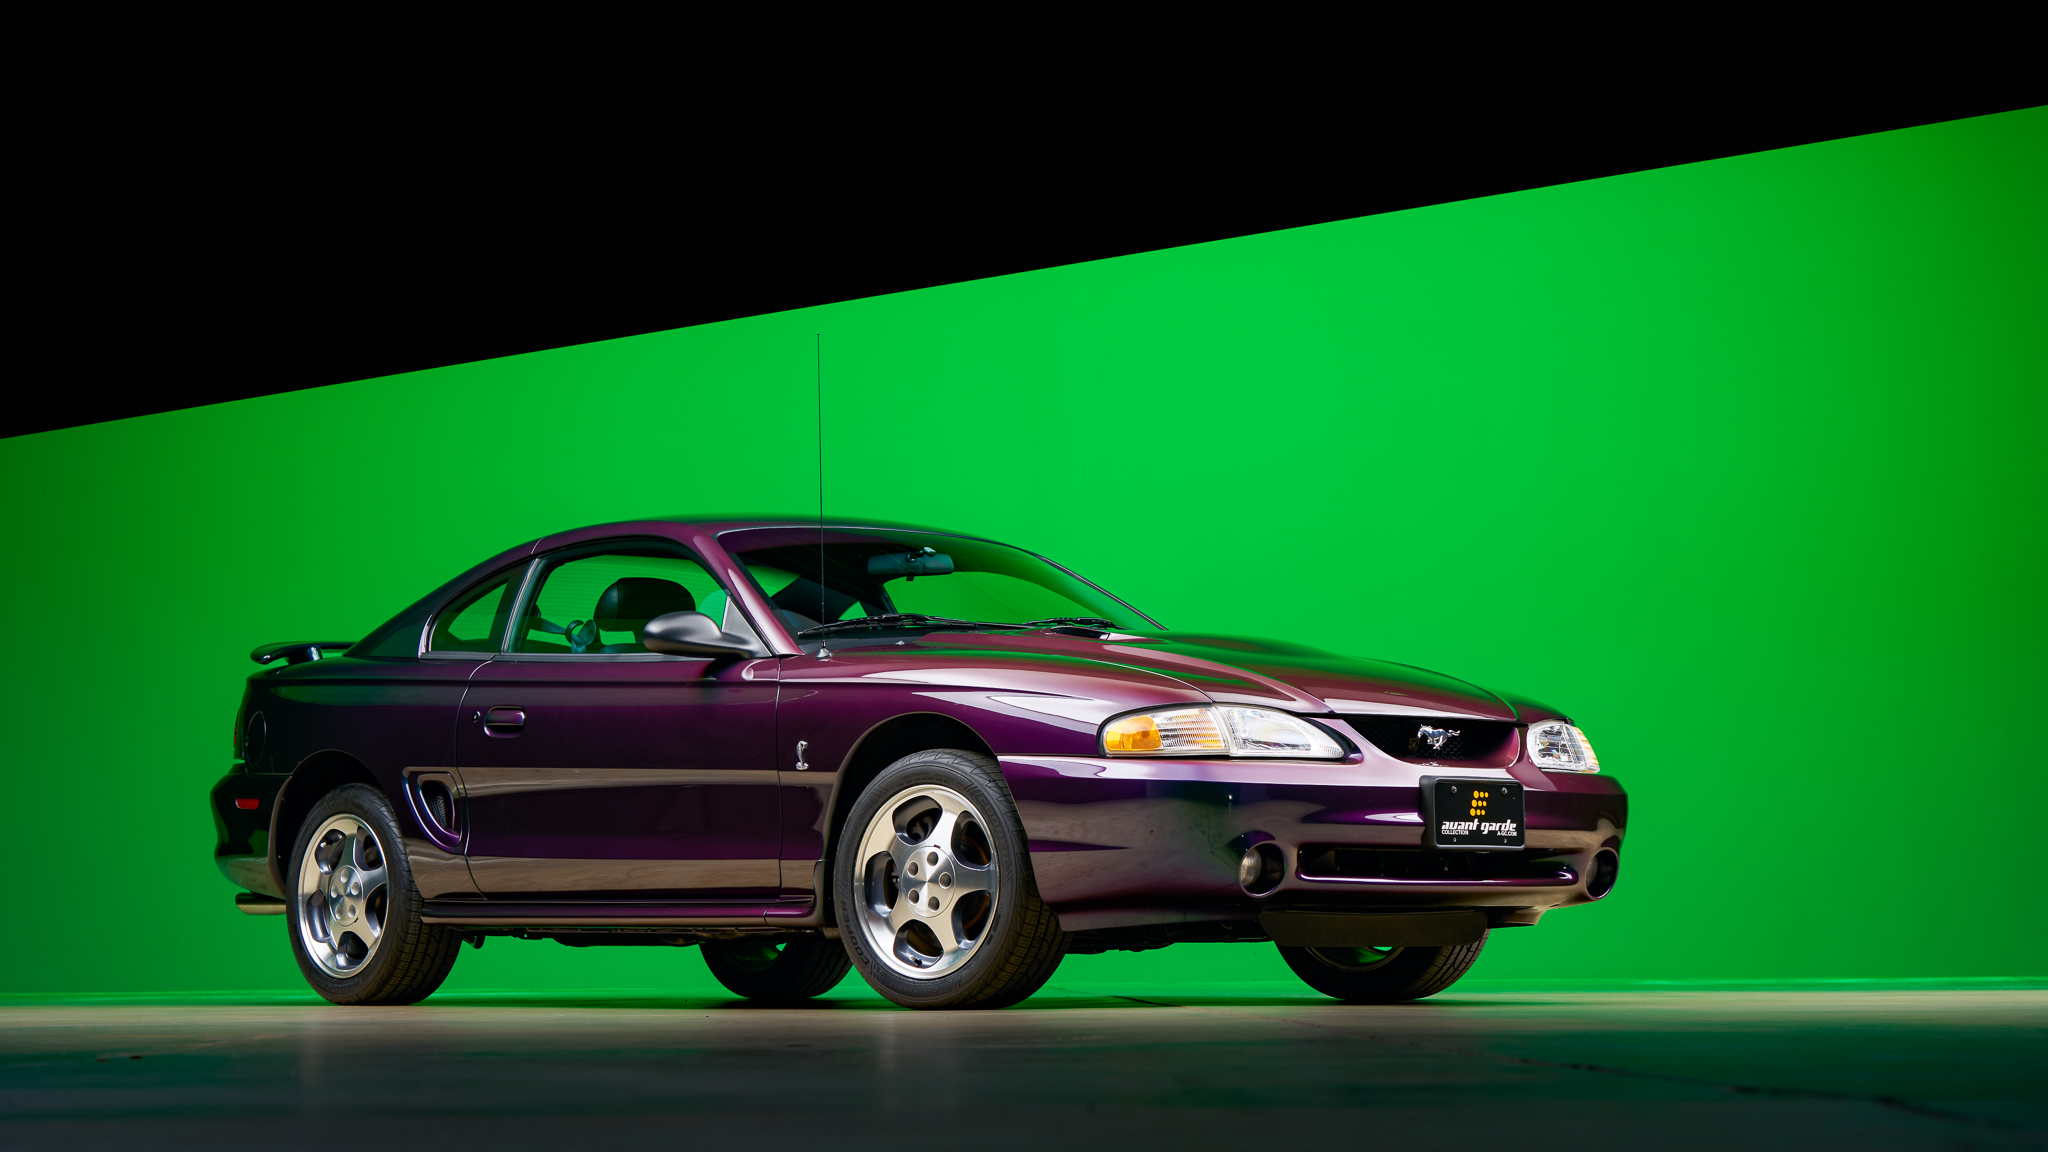 Used 19k-Mile 1996 Ford Mustang SVT Cobra Mystic Coupe 5-Speed Review